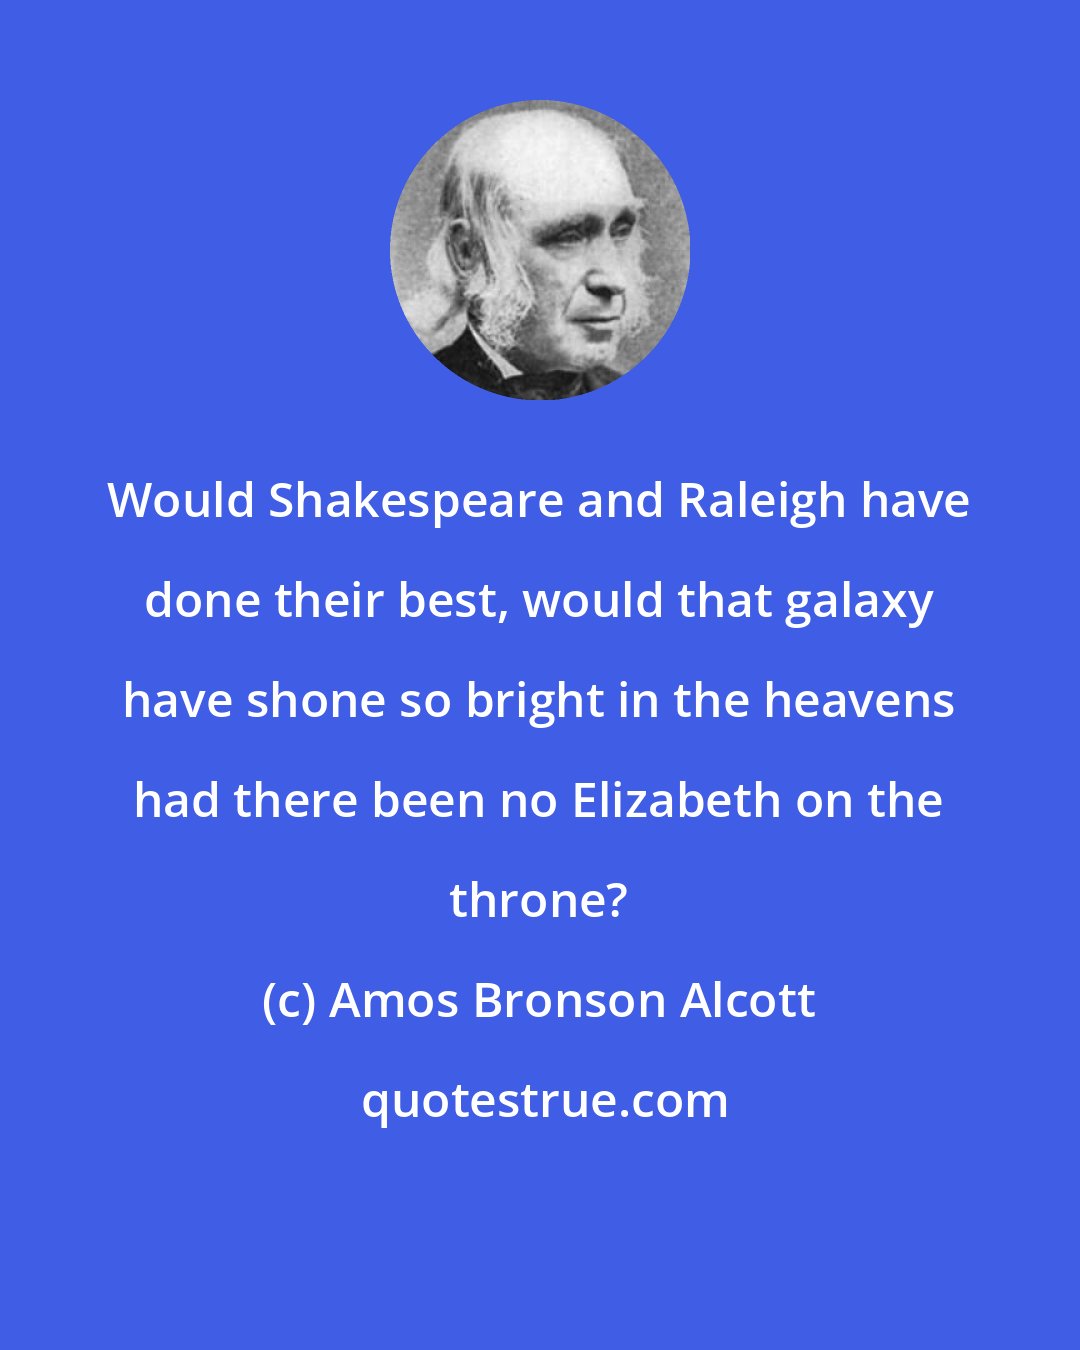 Amos Bronson Alcott: Would Shakespeare and Raleigh have done their best, would that galaxy have shone so bright in the heavens had there been no Elizabeth on the throne?